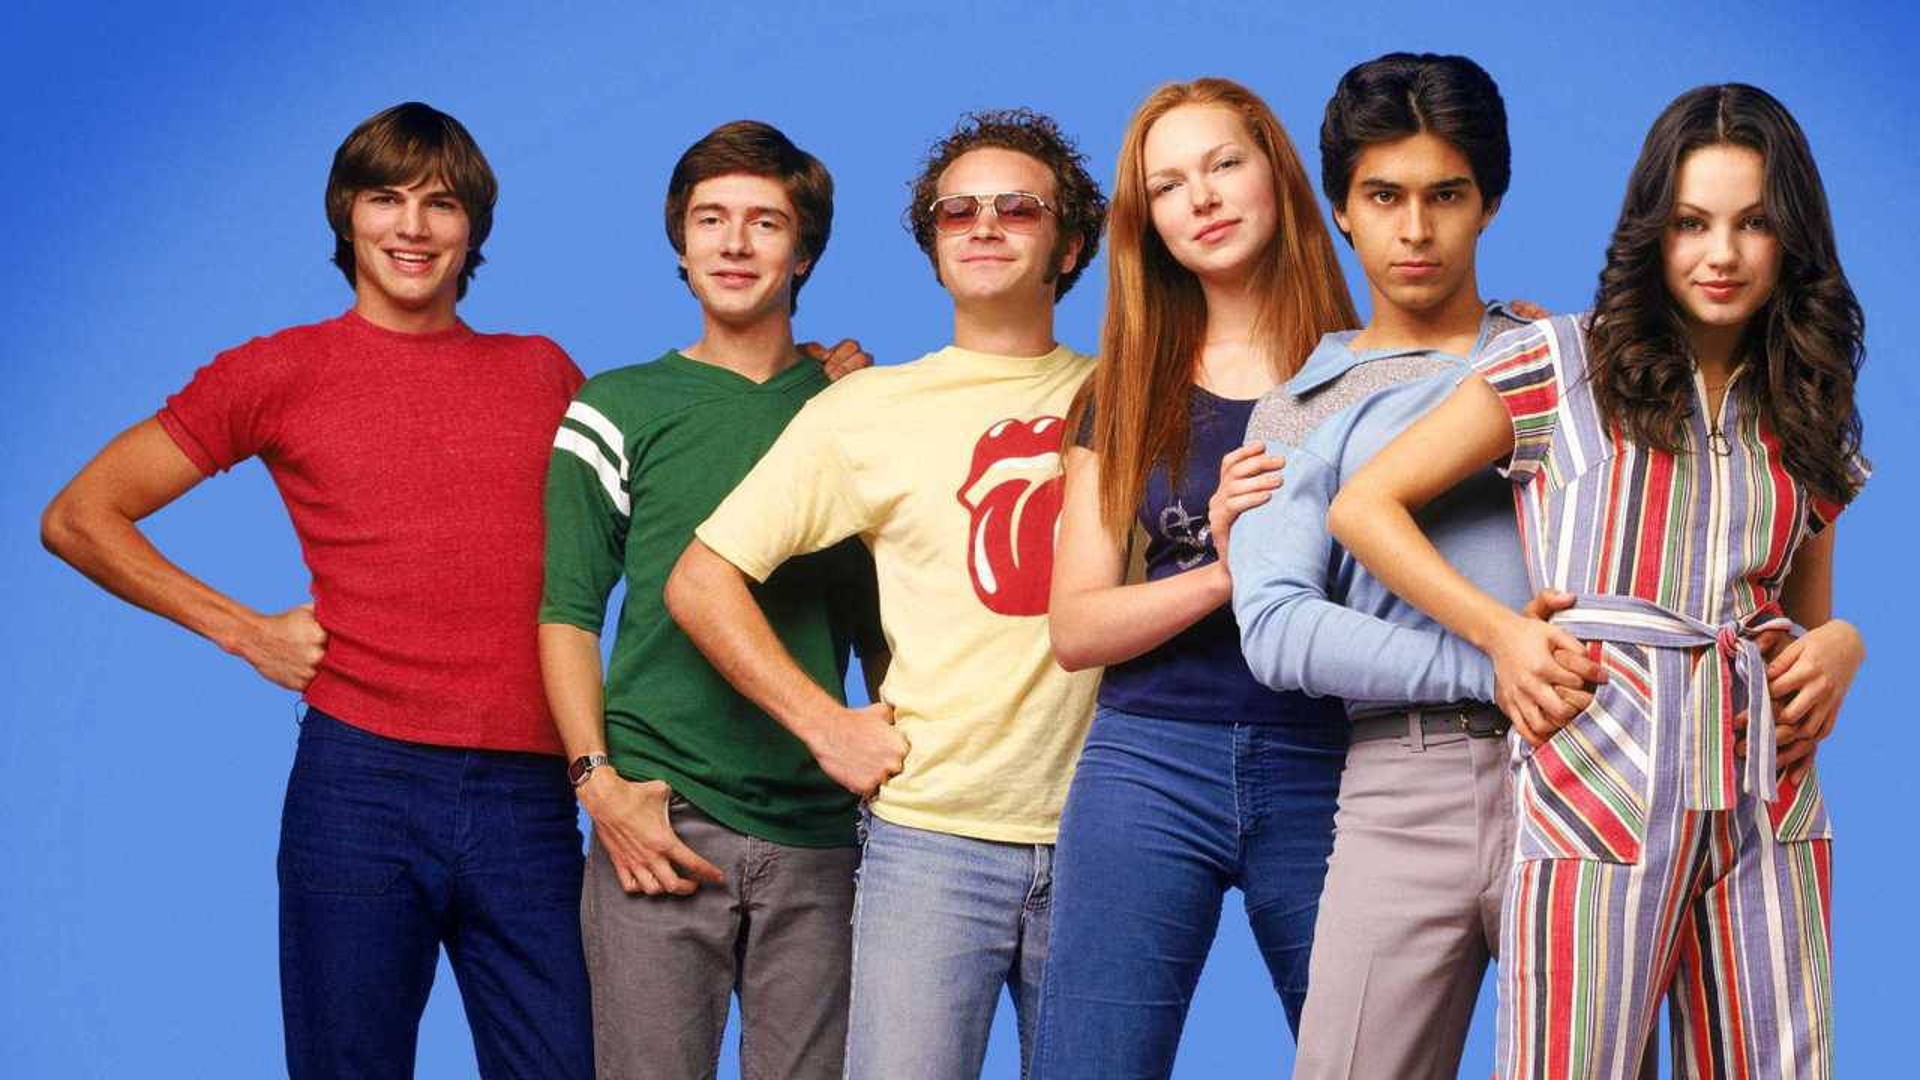 That-70s-show